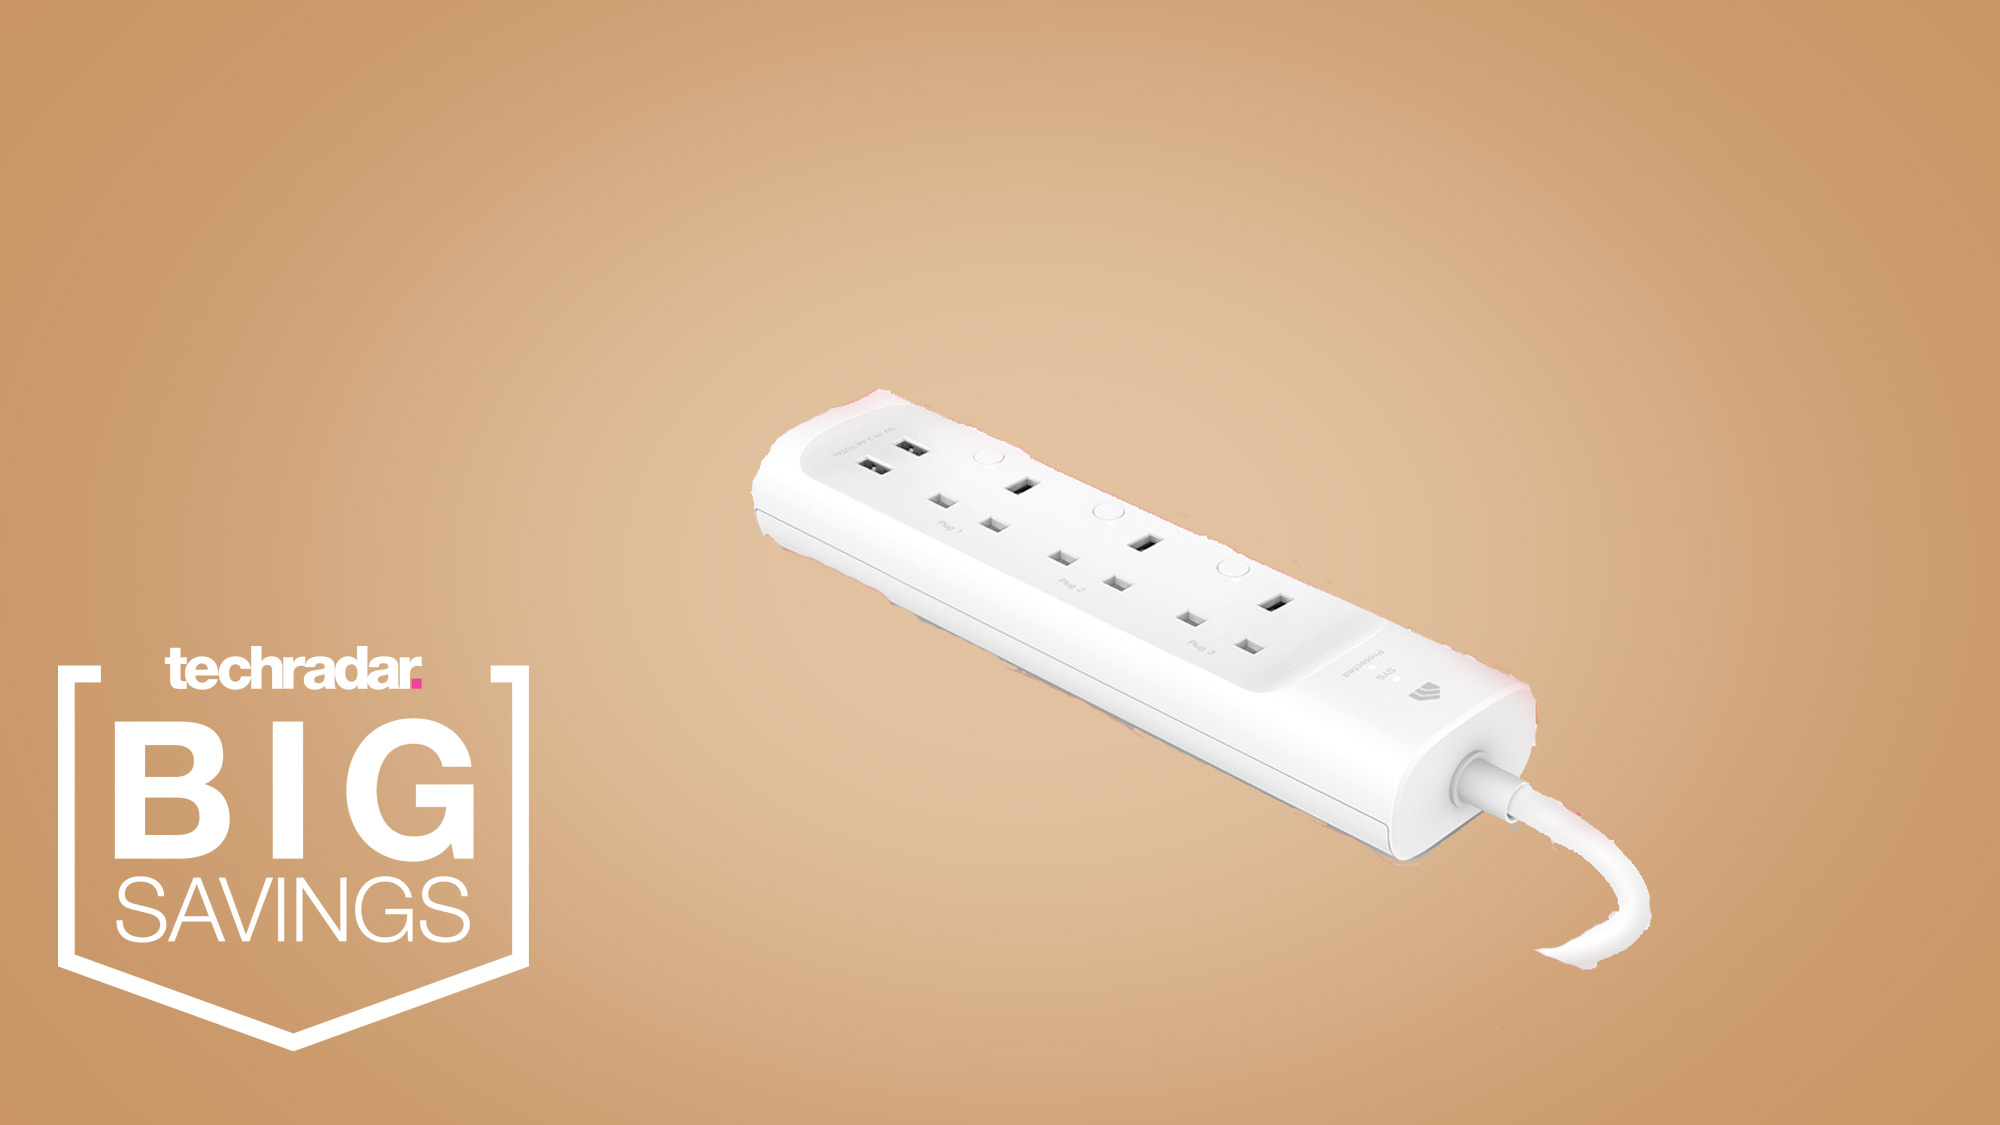 TP-Link KP200 smart outlet is actually an outlet, not a smart plug